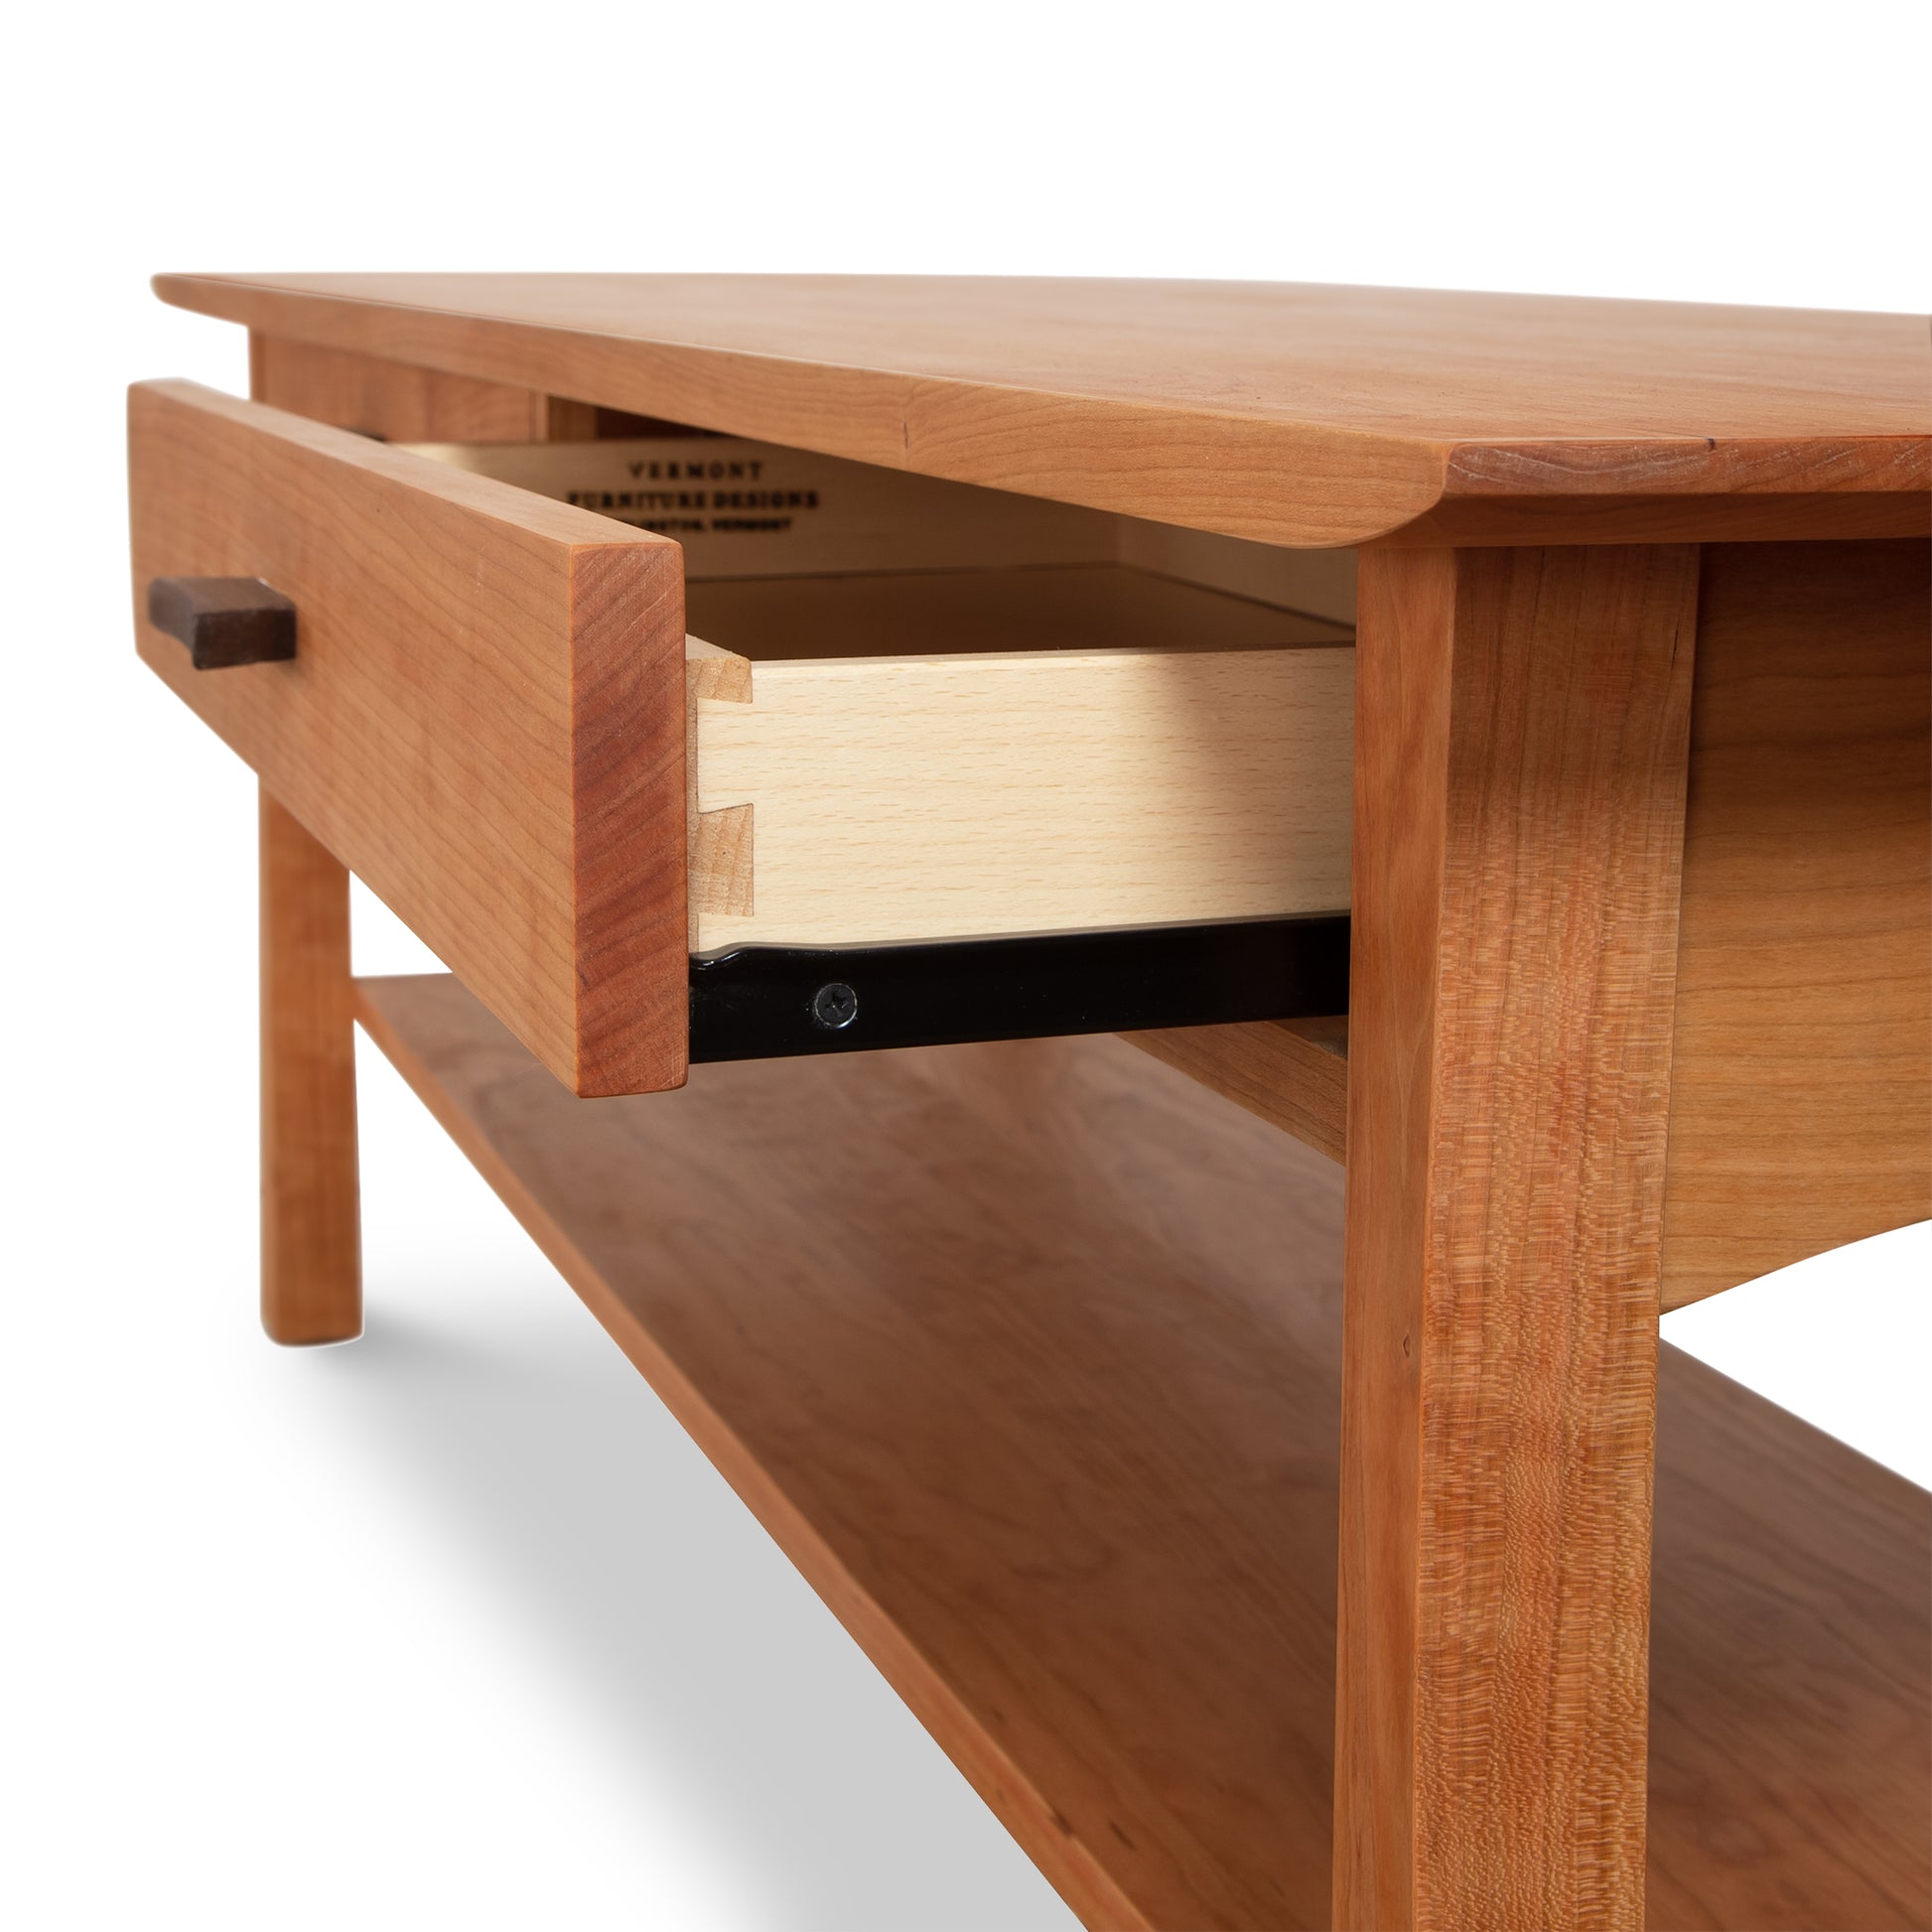 A close-up view of a solid hardwoods Vermont Furniture Designs Contemporary Craftsman Console Coffee Table with an open drawer, revealing its construction and the dovetail joints that connect the drawer to its face.